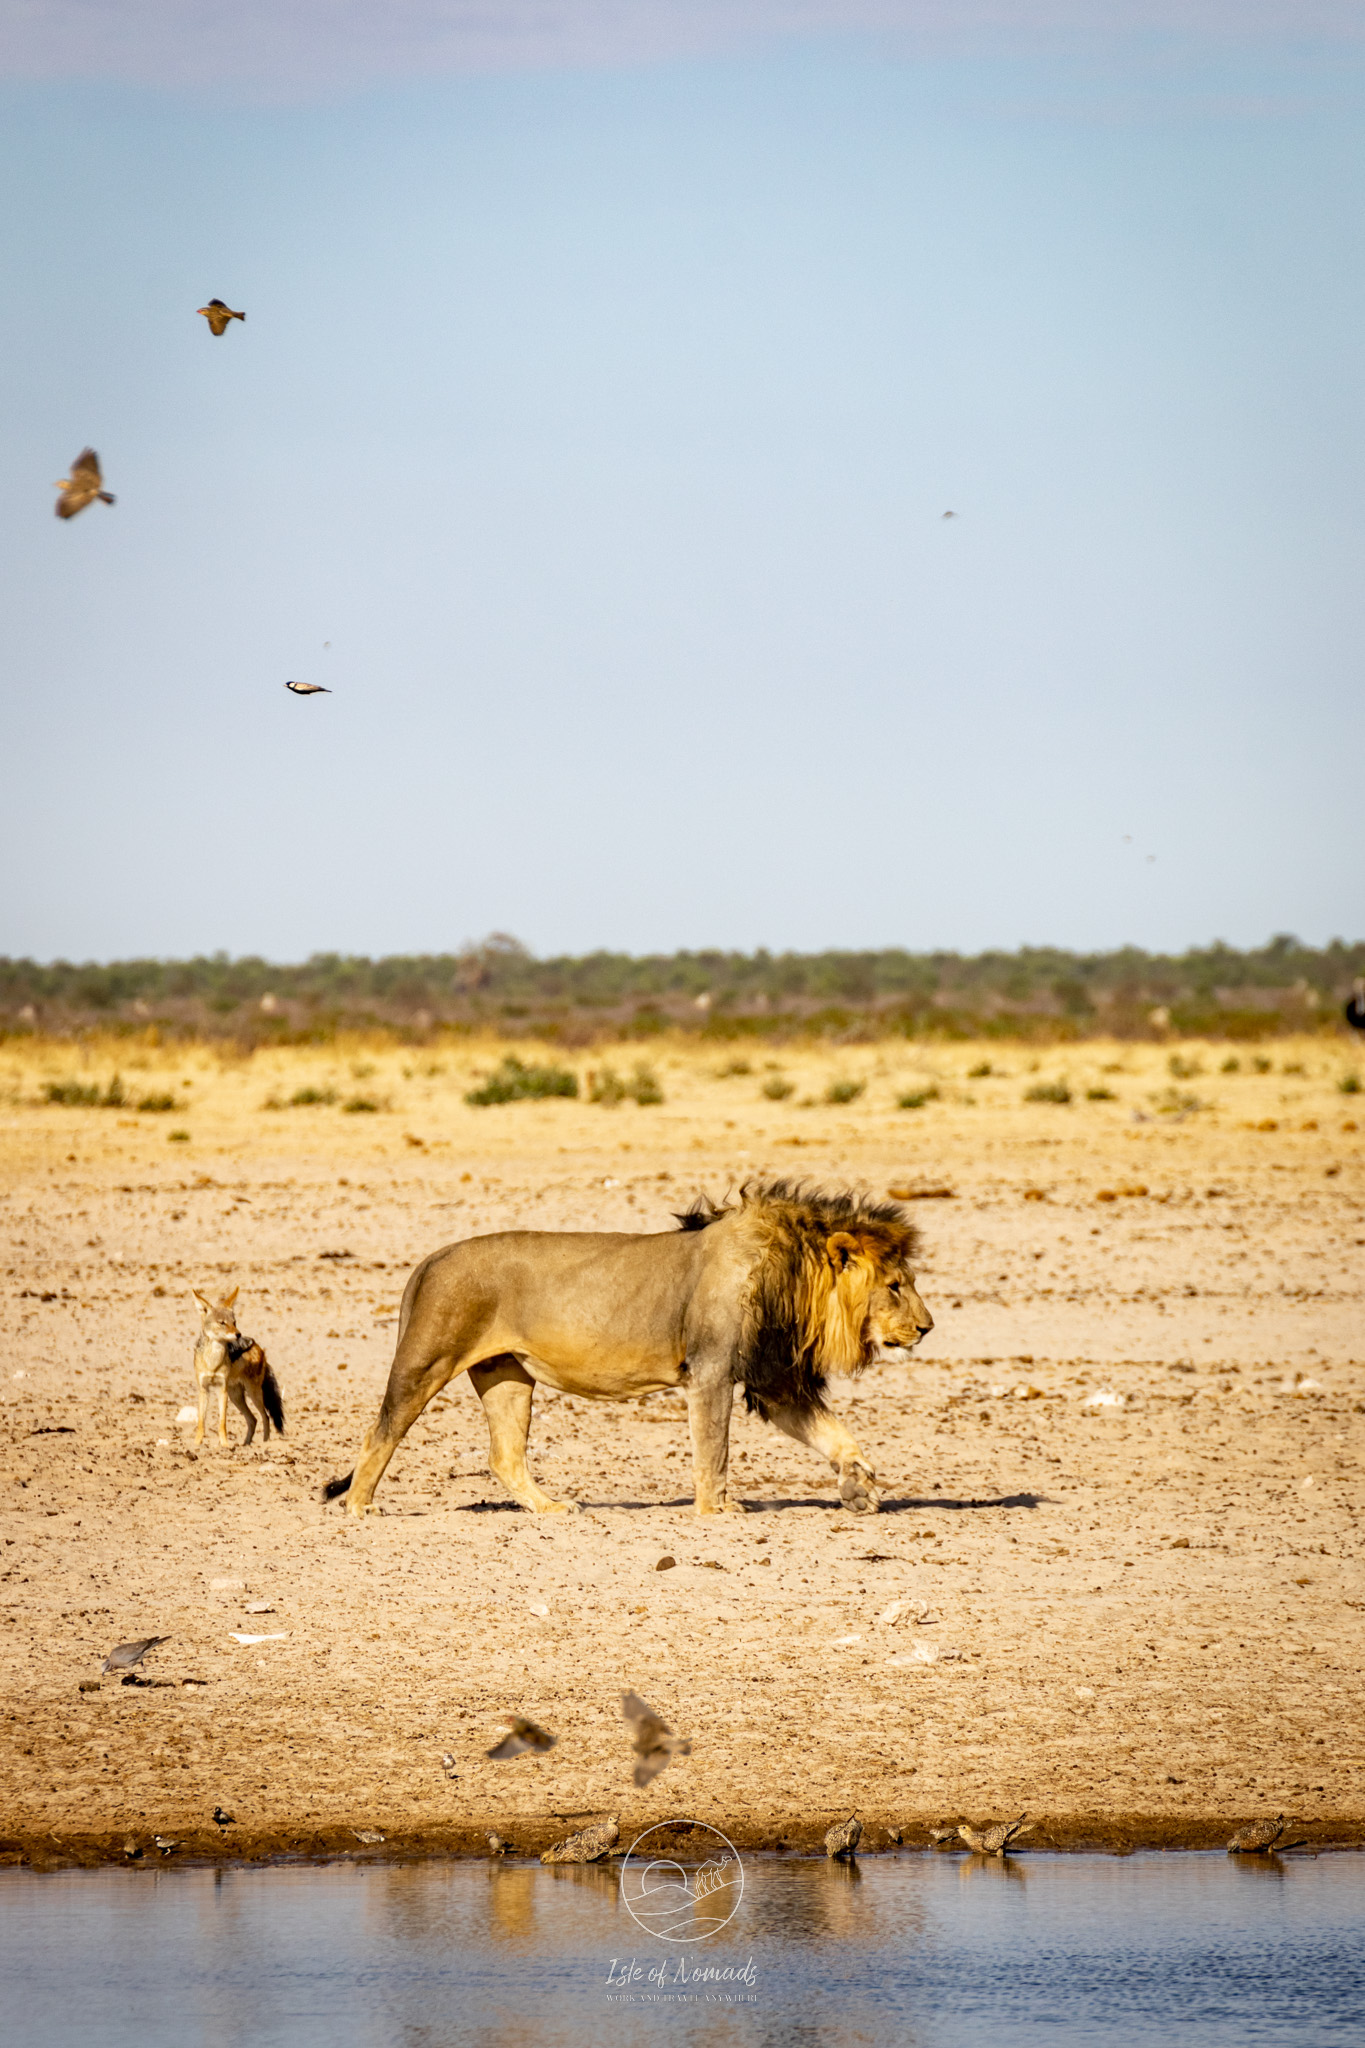 Etosha is a great park to spot even normally elusive wildlife